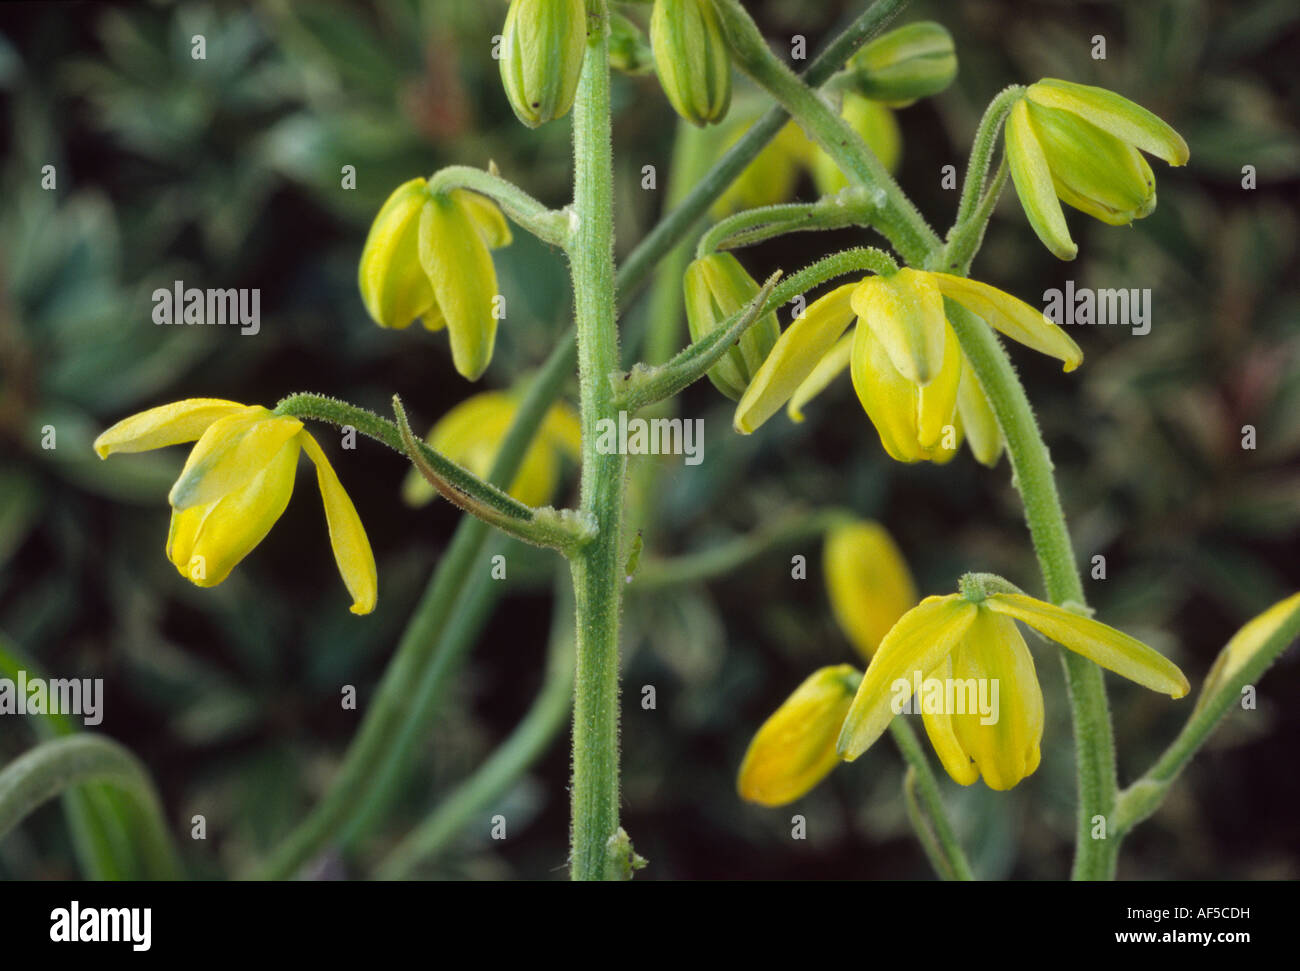 Albuca shawii Close up of raceme of yellow flowers. Stock Photo